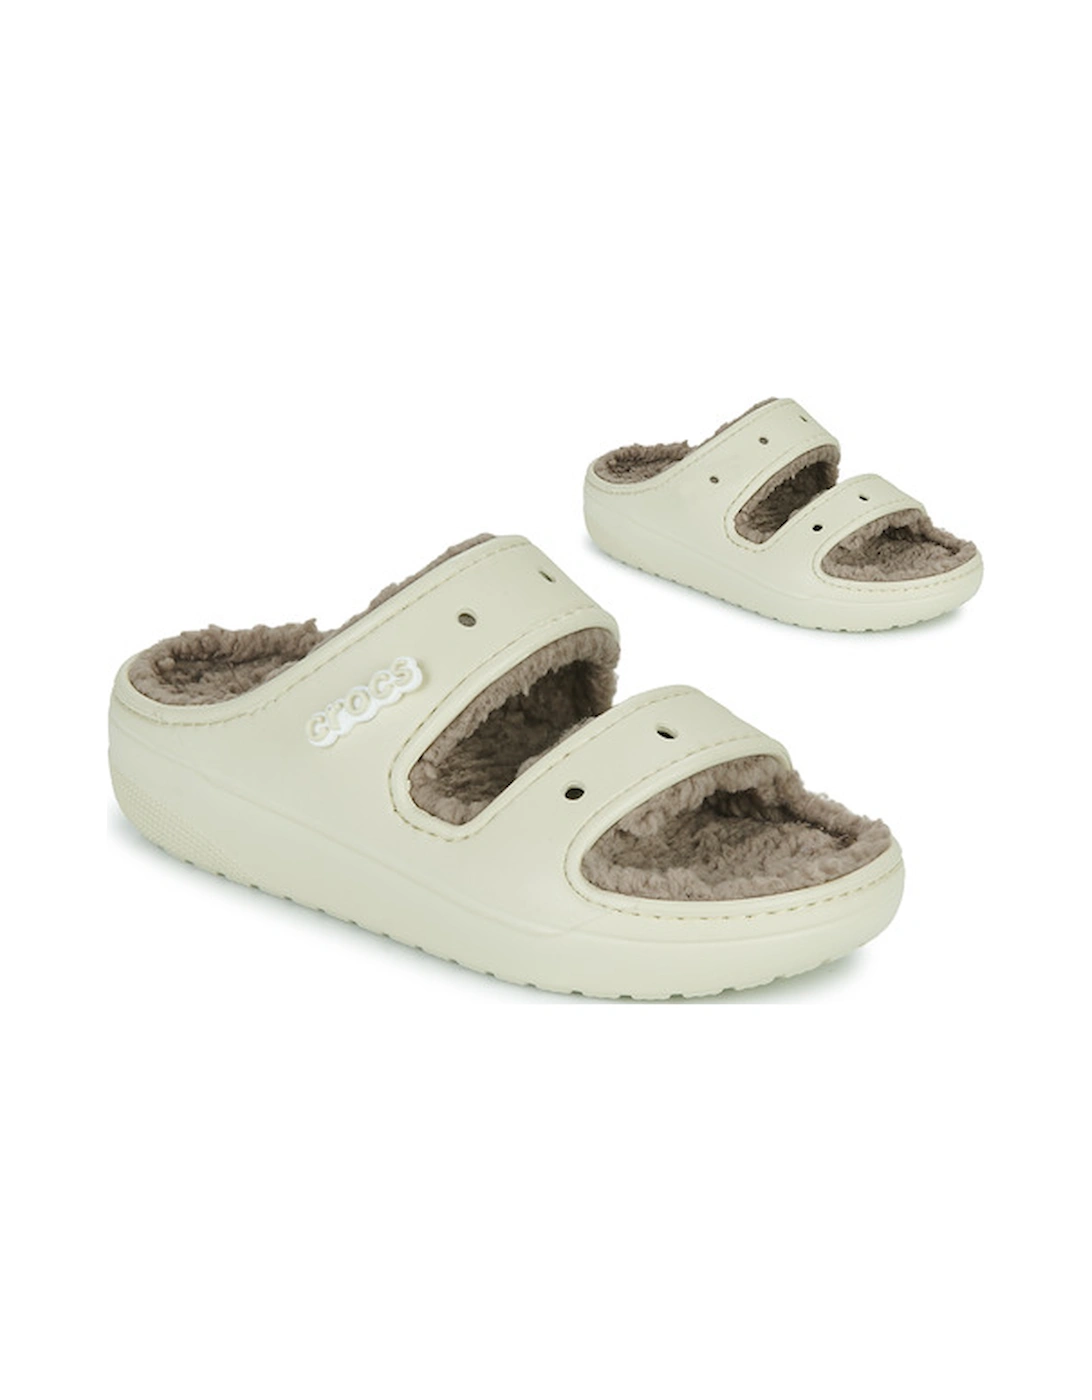 CLASSIC COZZZY SANDAL, 9 of 8